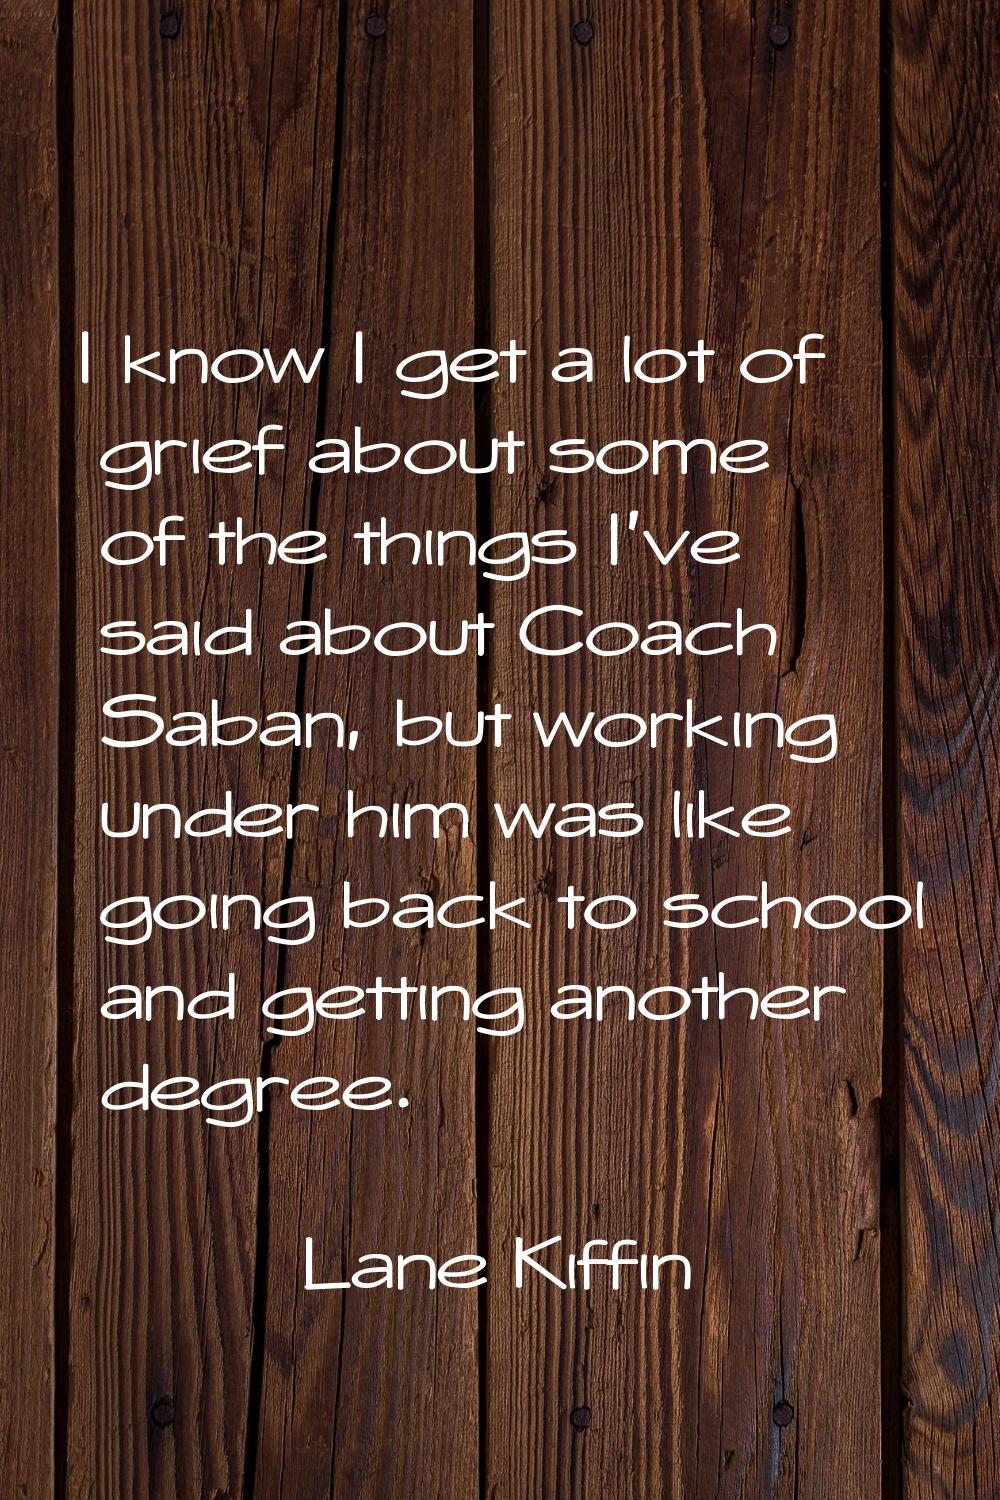 I know I get a lot of grief about some of the things I've said about Coach Saban, but working under